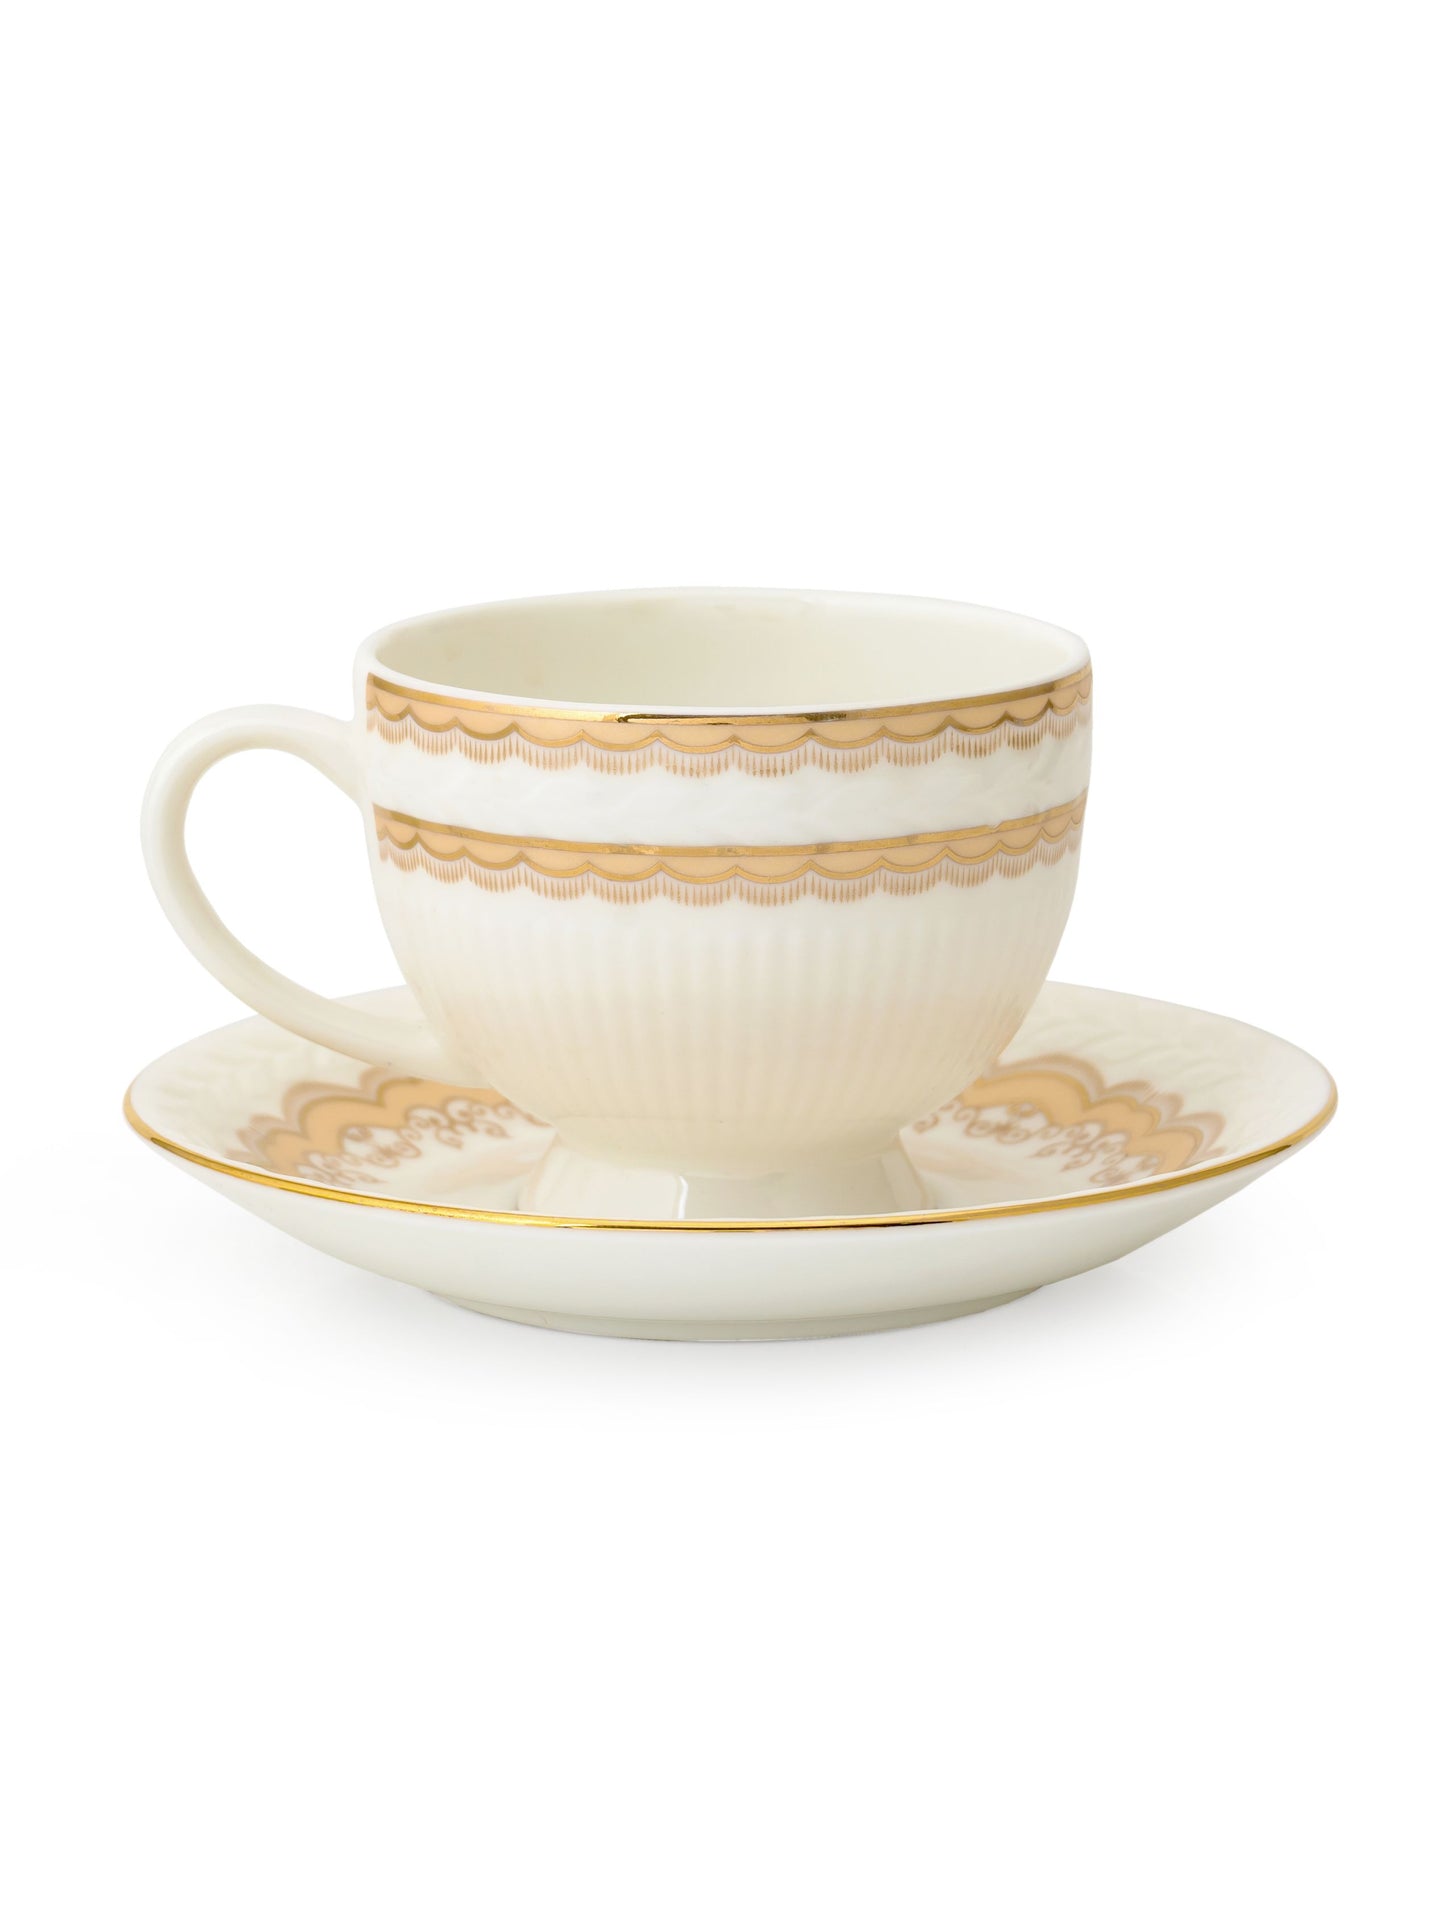 Snow Impression Cup & Saucer, 170 ml, Set of 12 (6 Cups + 6 Saucers) (1405)